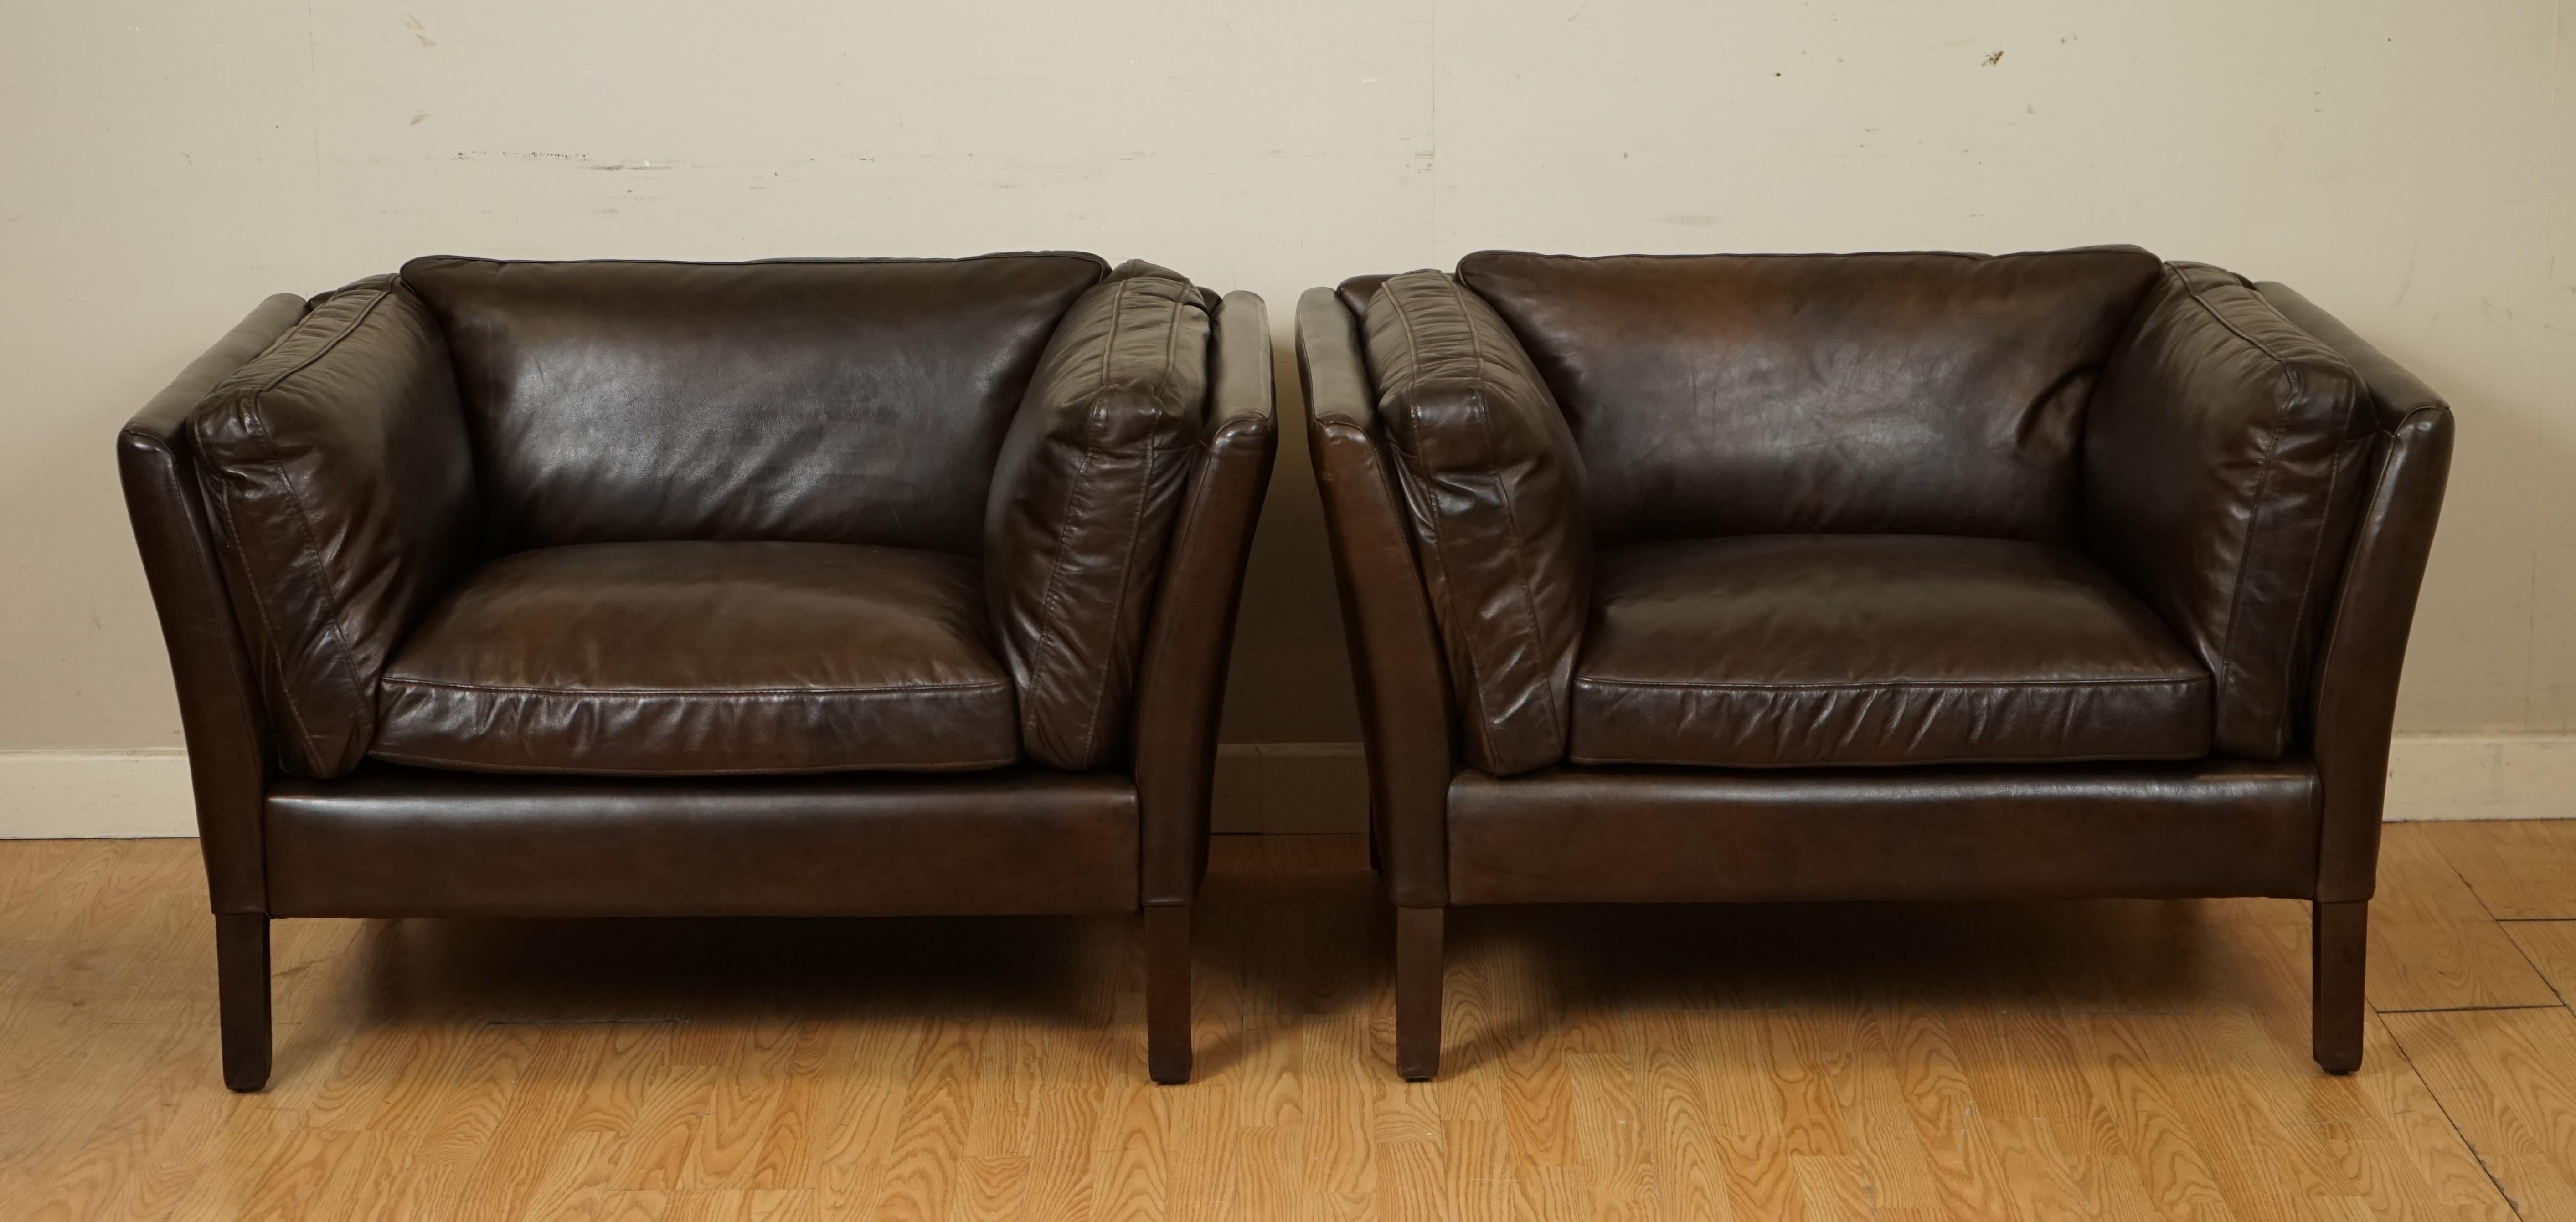 British Like New Mint Condition Pair of Halo Groucho Leather Armchairs